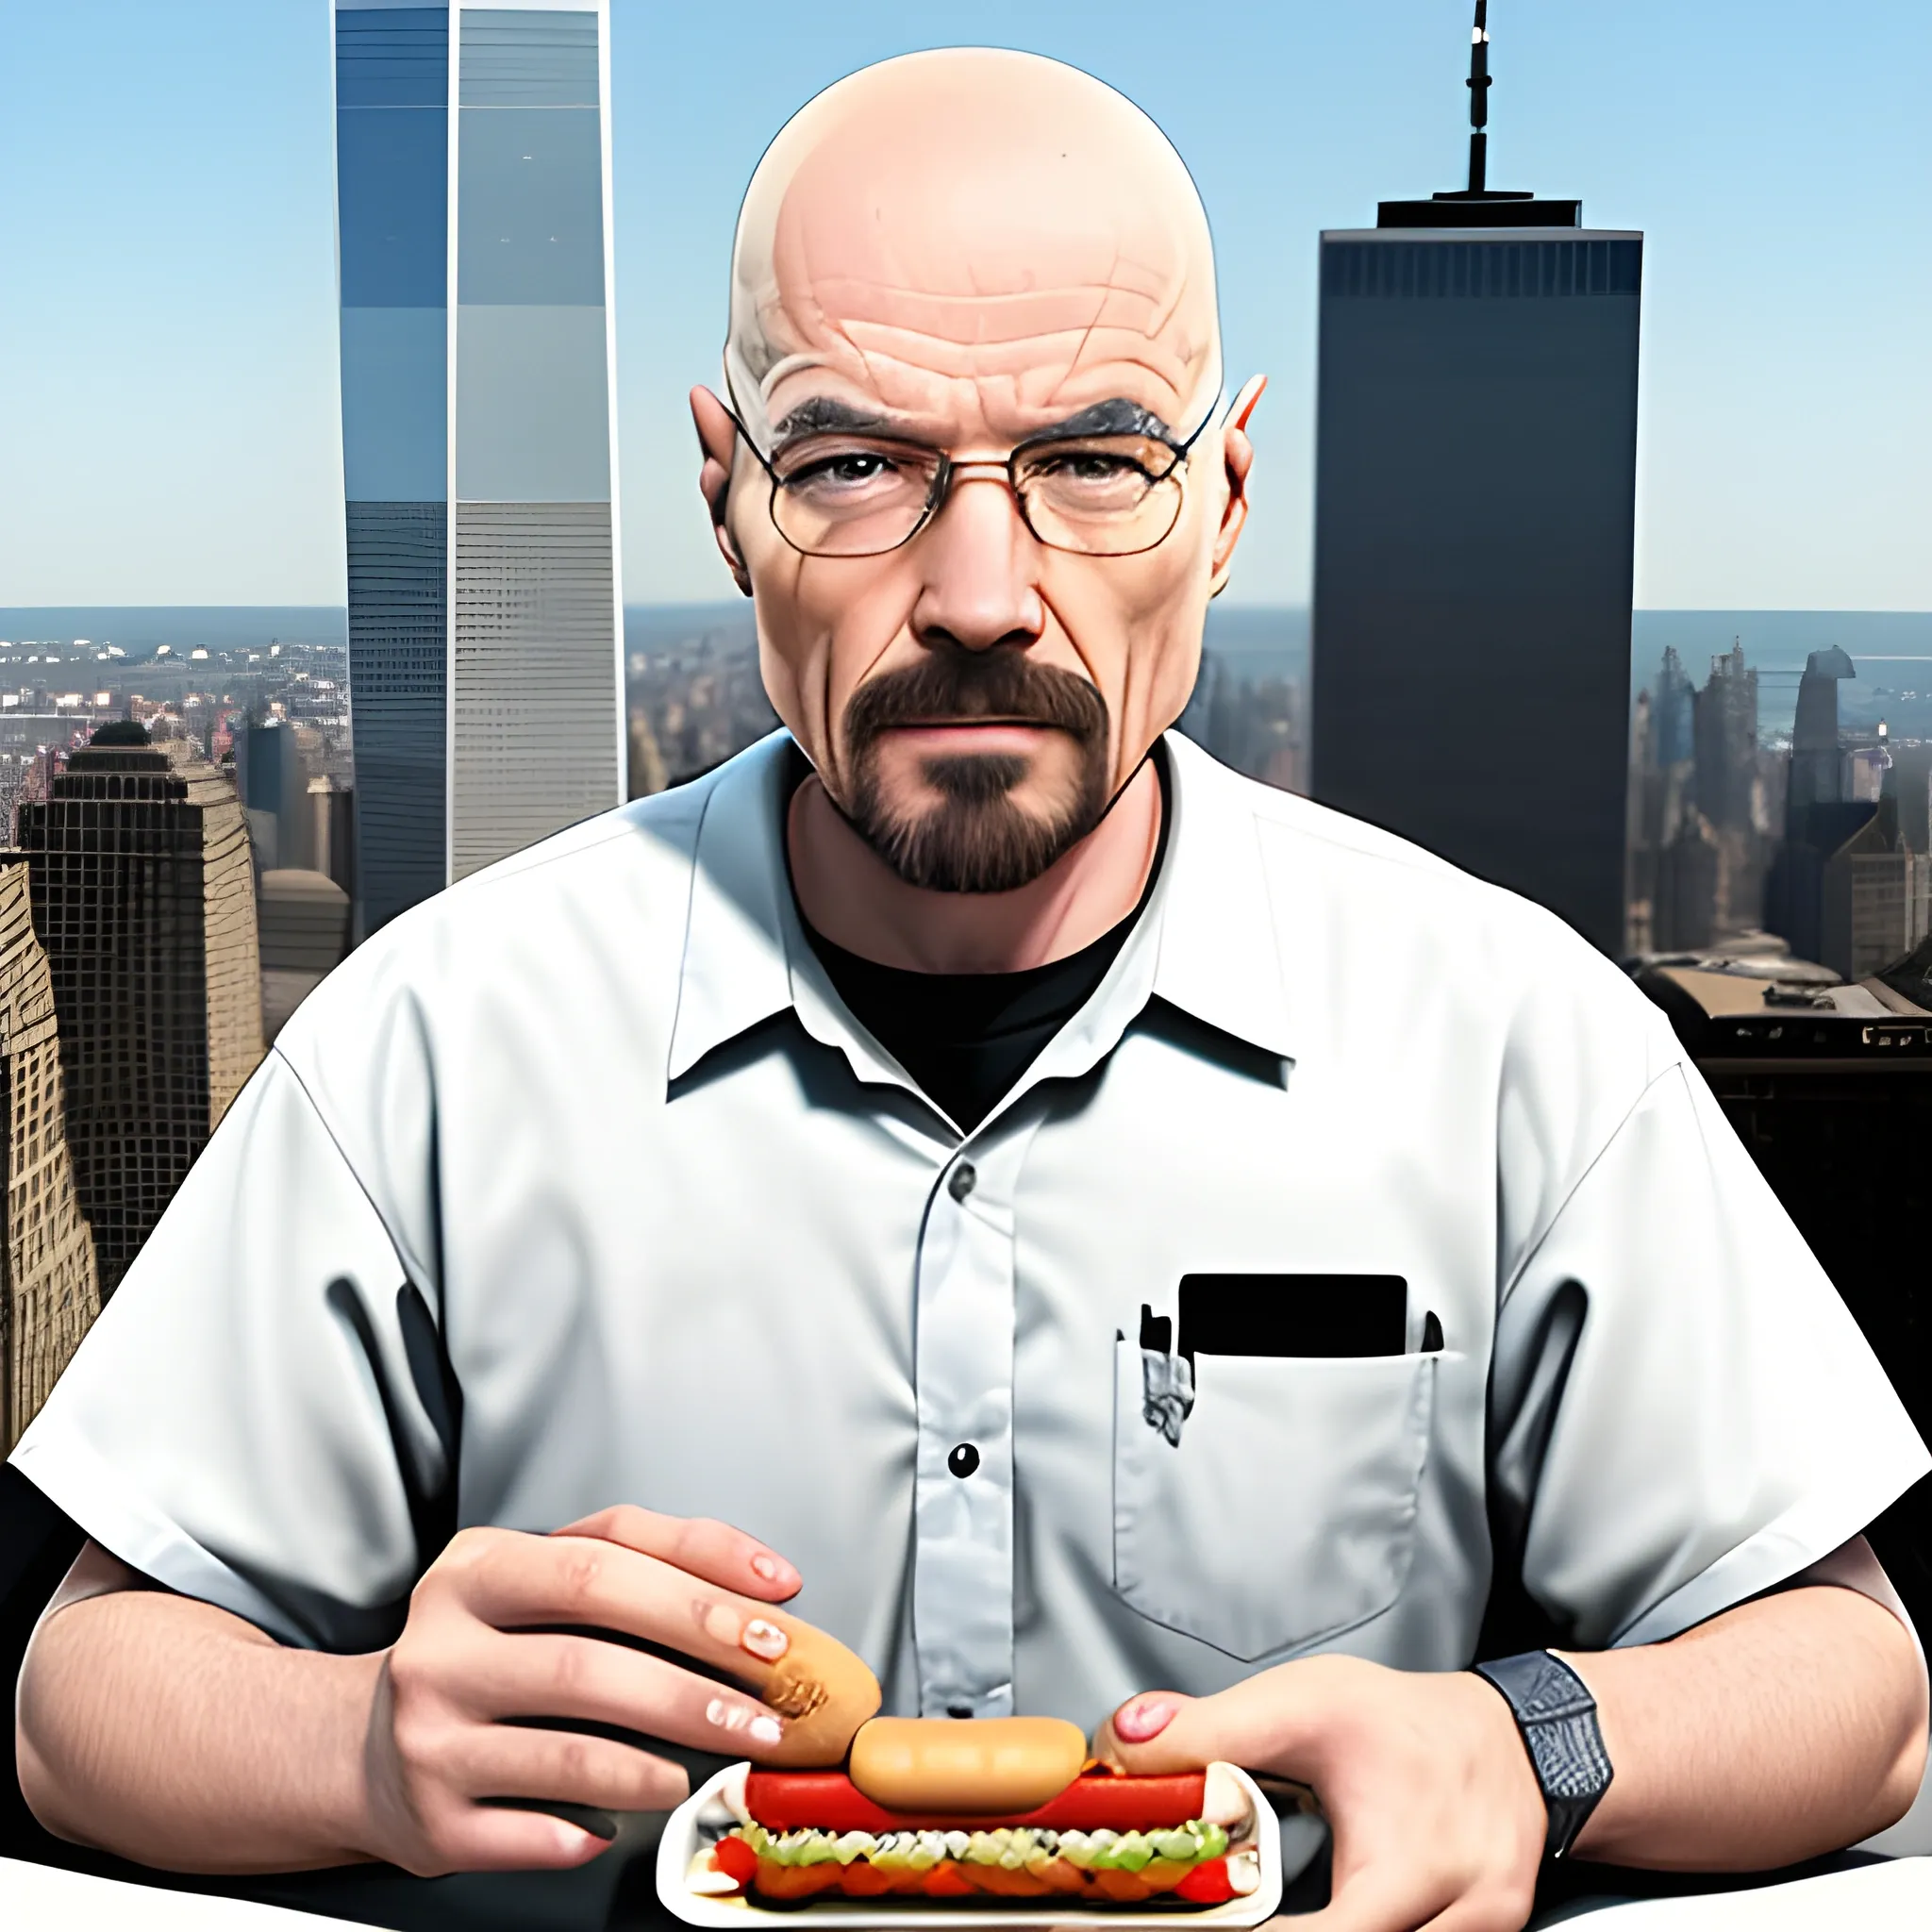 walter white griddy emote collab with among us eating a hot dog on the world trade center, 3D